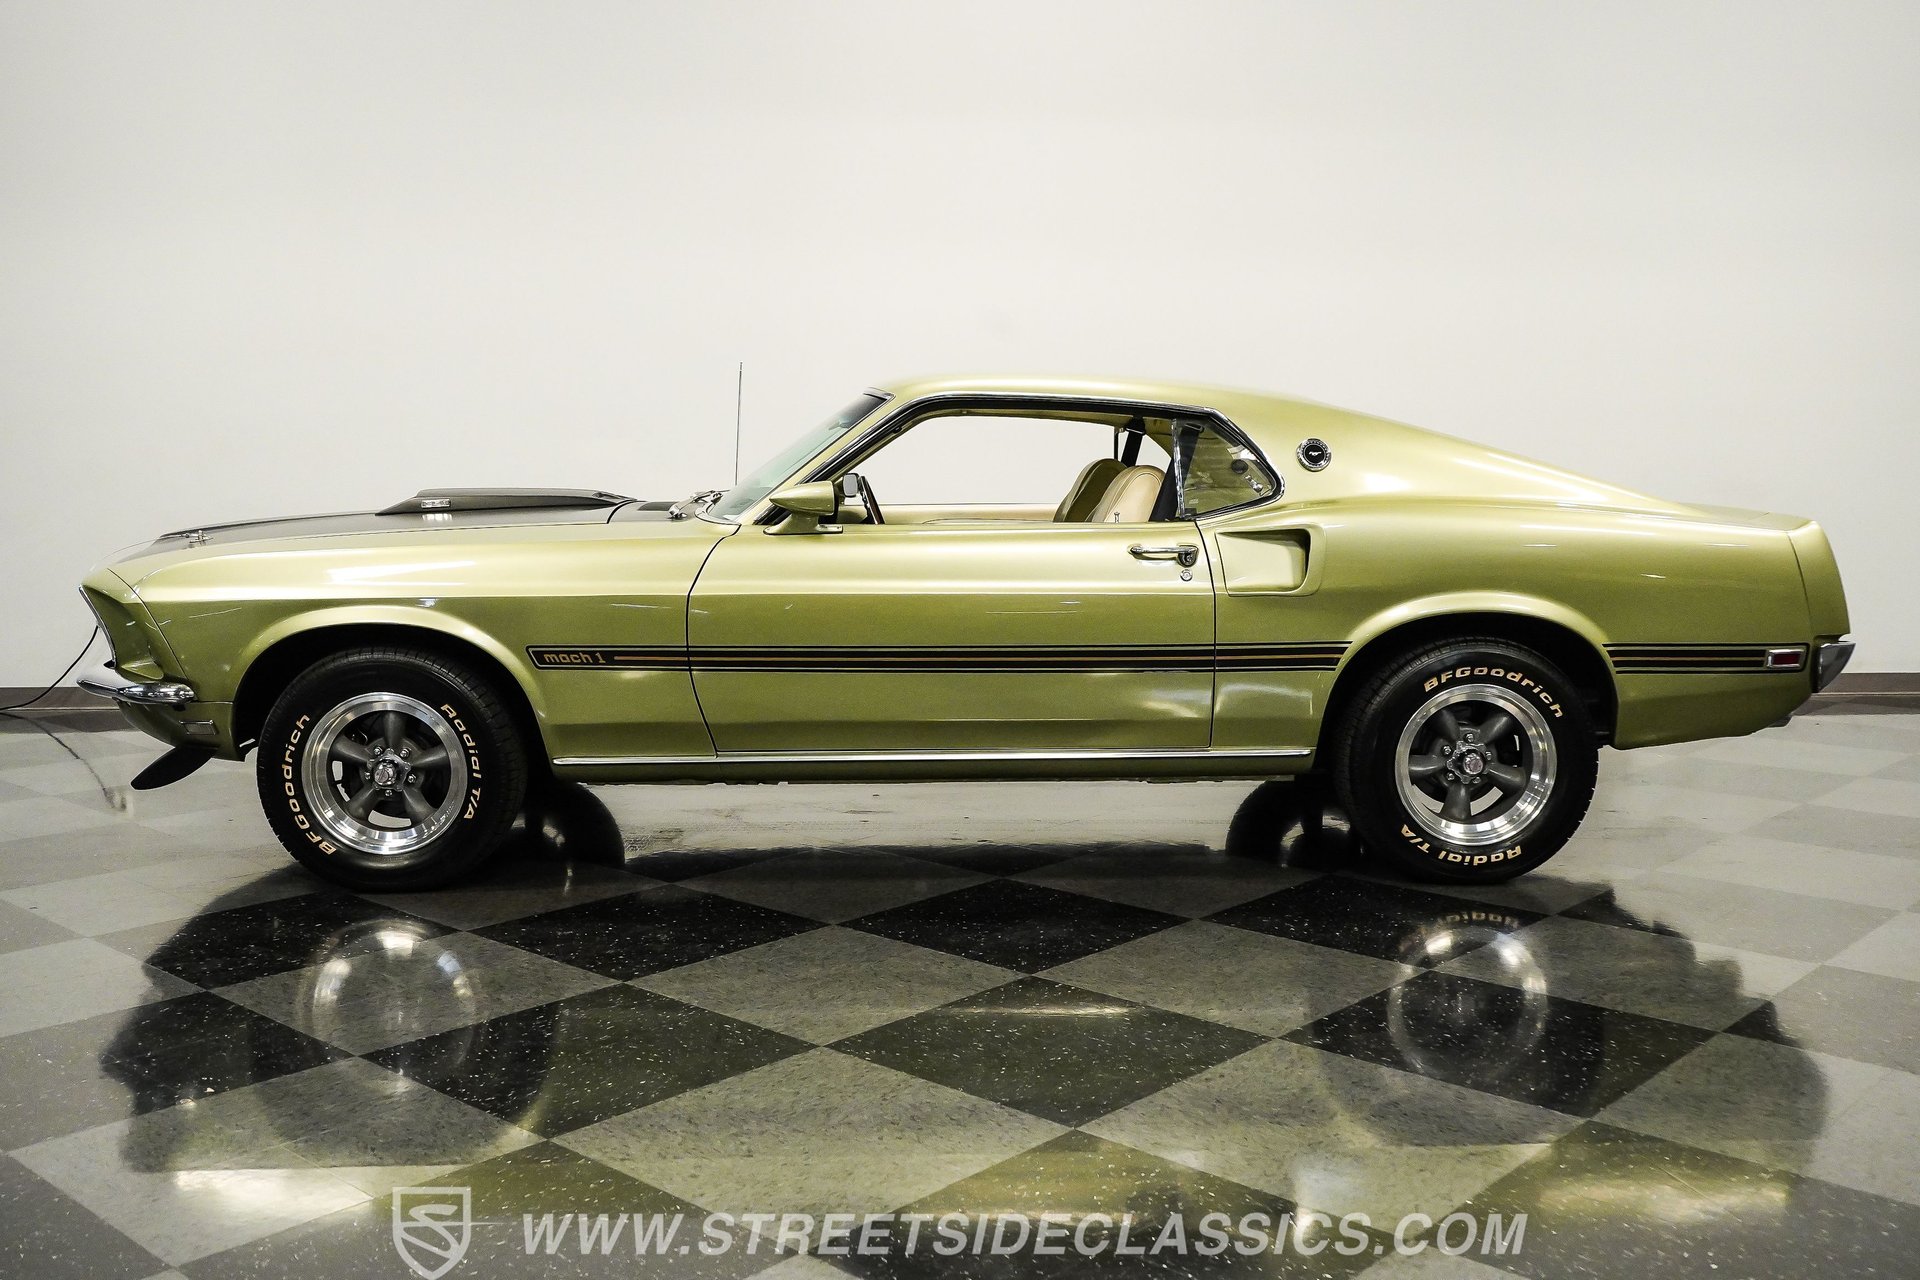 1969 Ford Mustang | Classic Cars for Sale - Streetside Classics